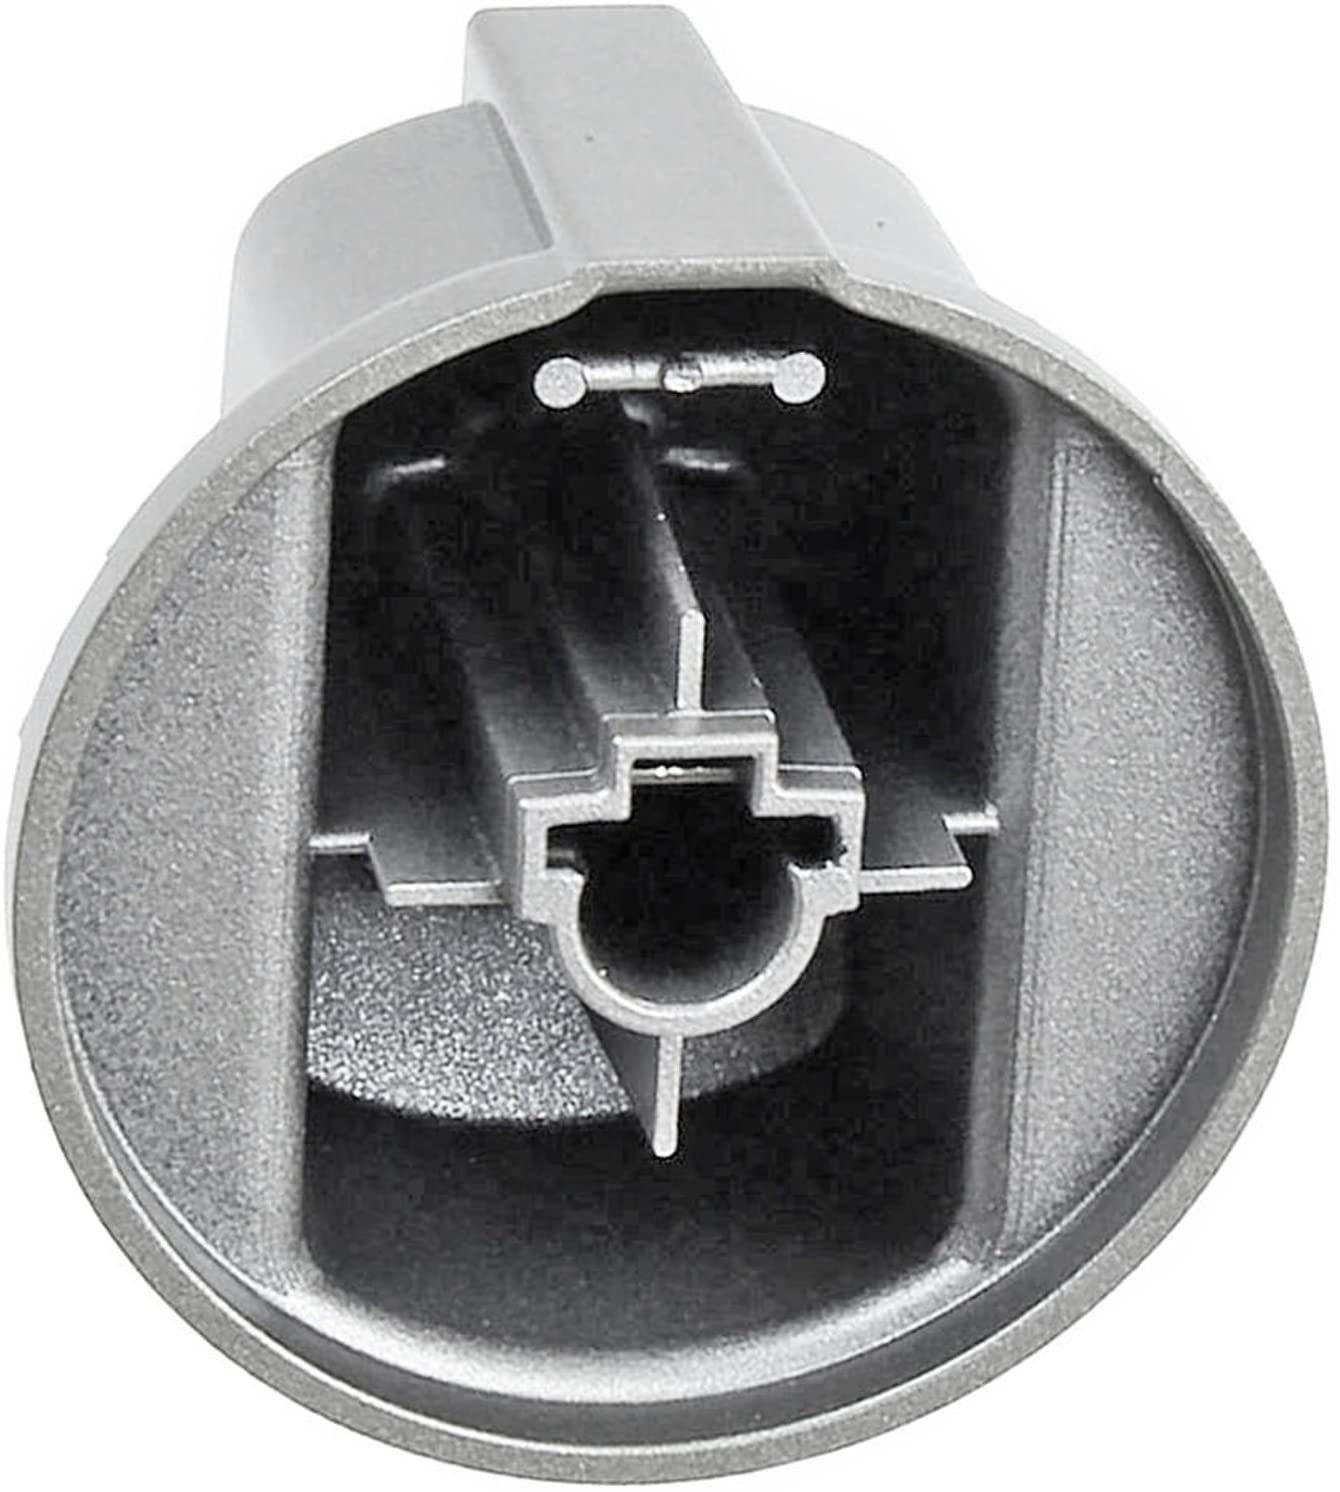 Control Knob Switch Button for HOTPOINT CIM53KCAIXGB Cooker Oven Pack of 3 (Silver/INOX)